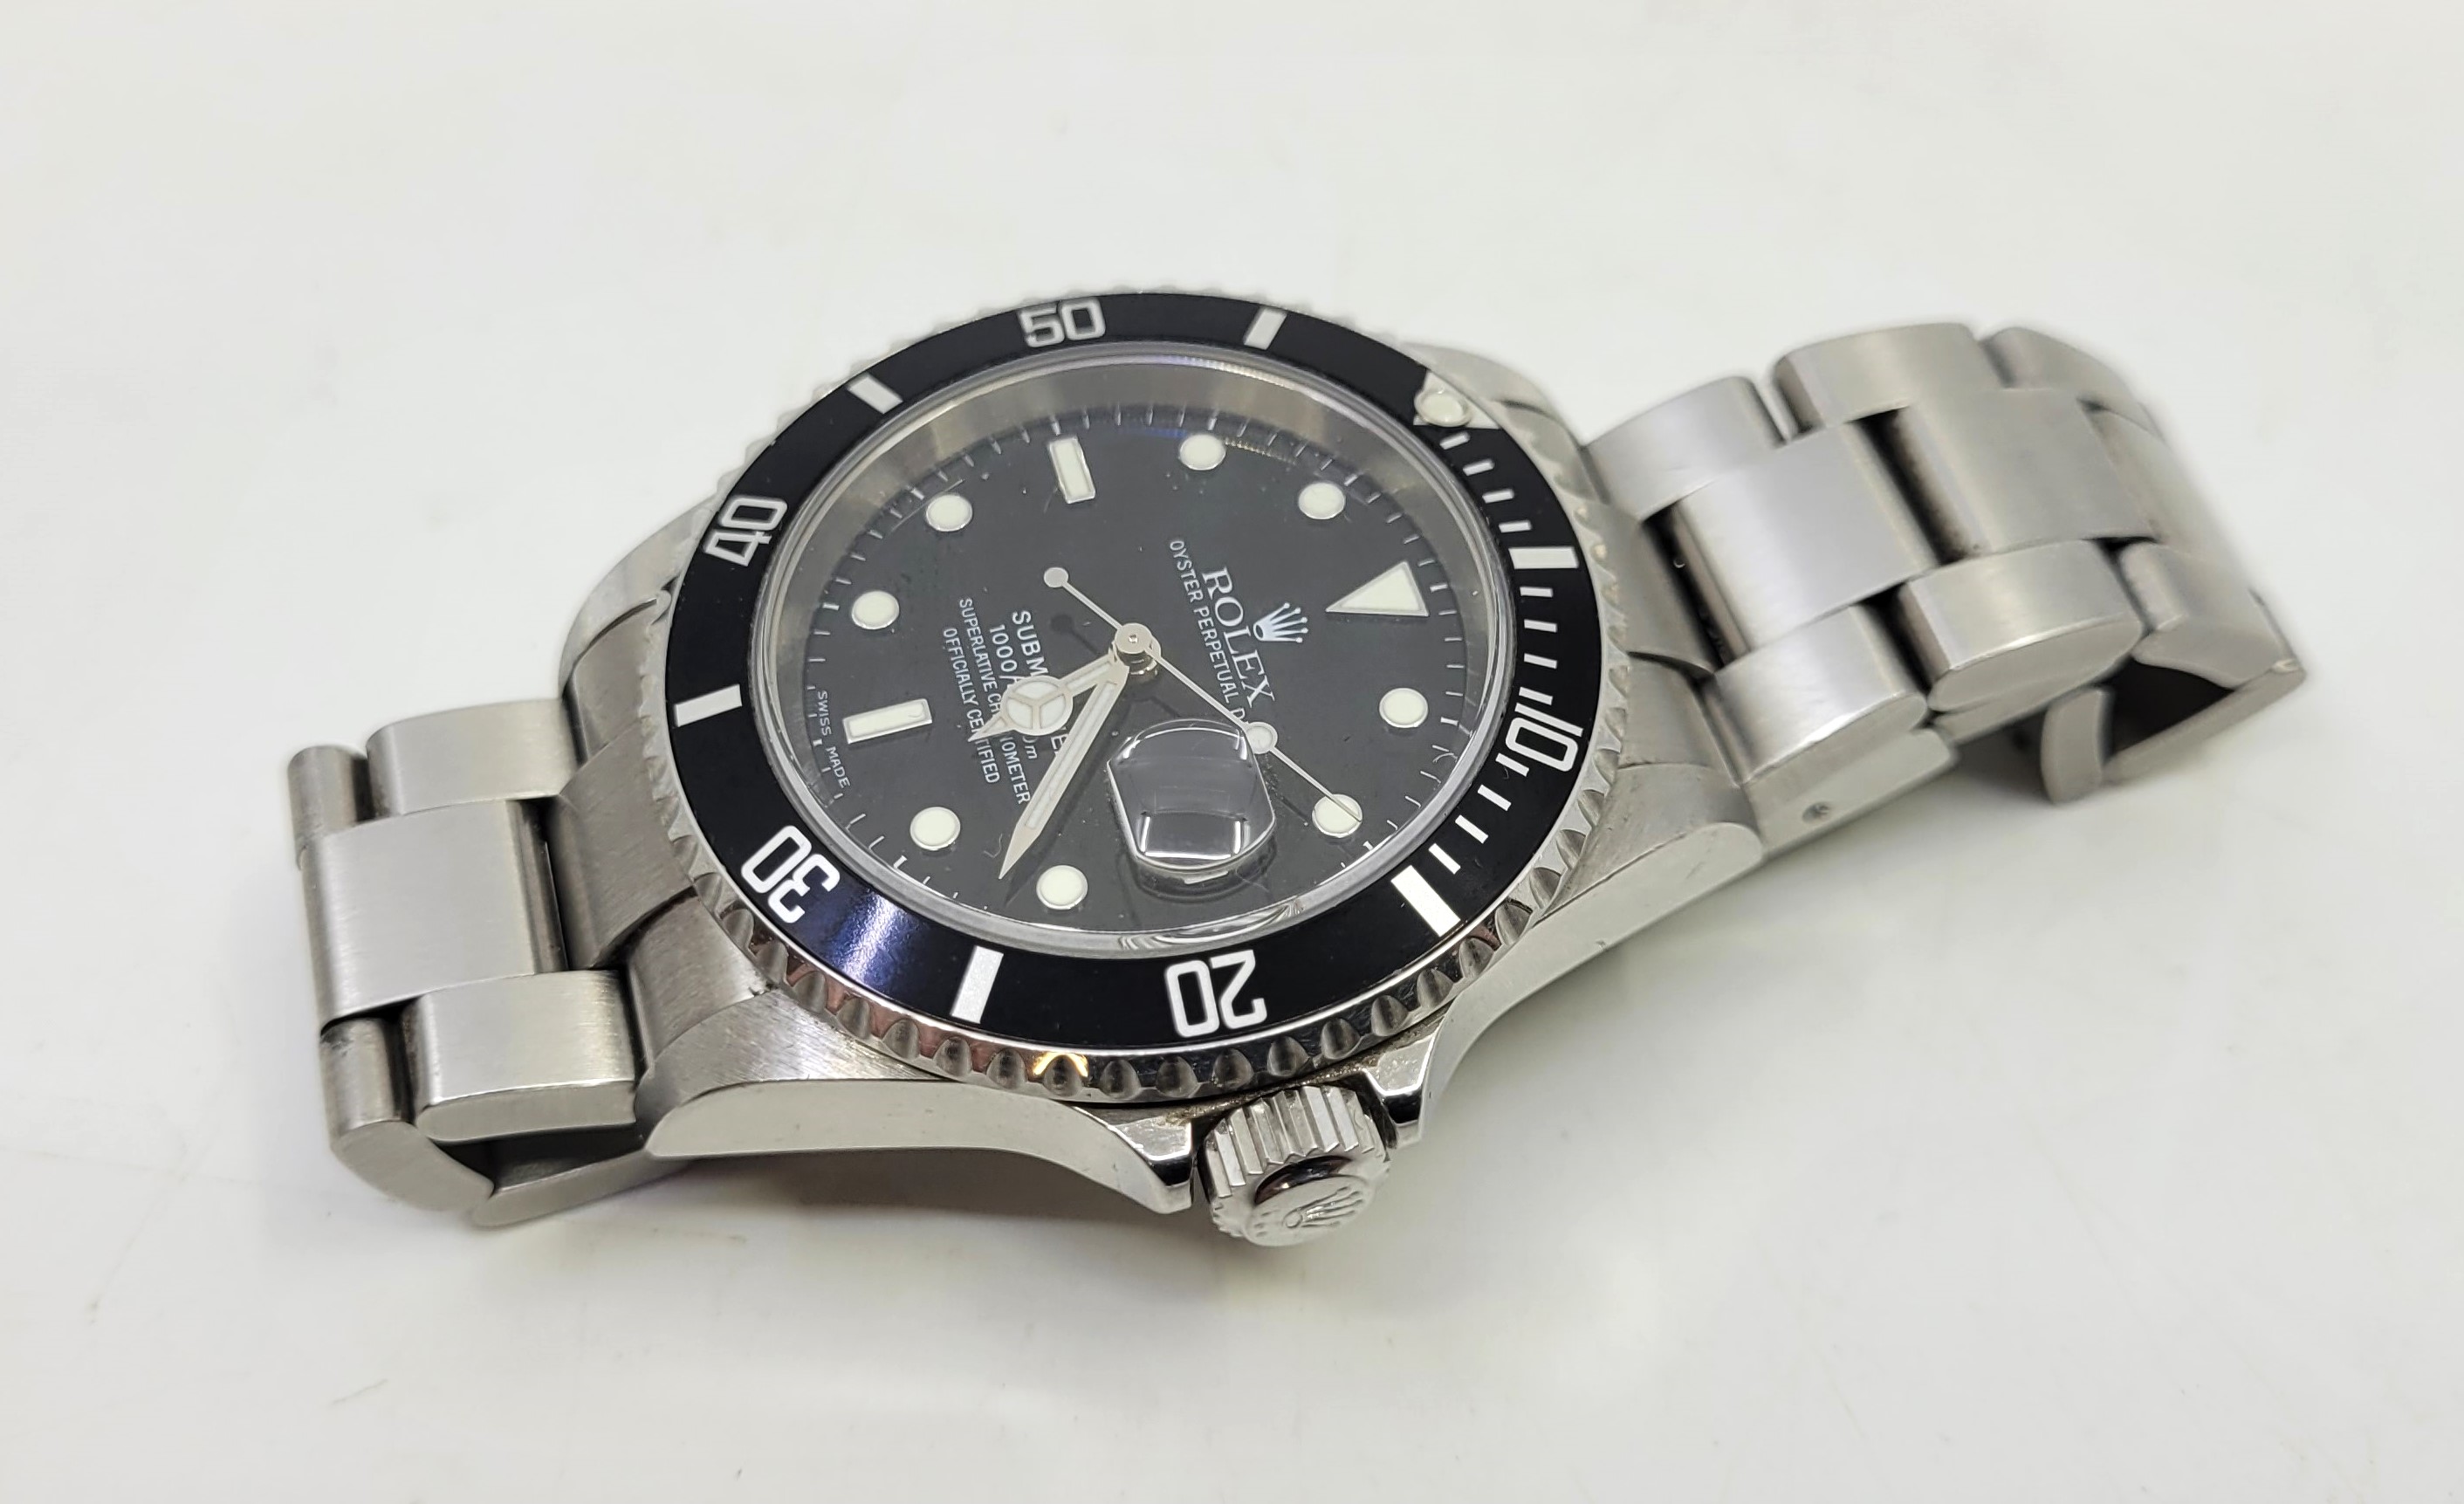 Rolex Oyster Perpetual Date "Submariner" Superlative Chronometer stainless steel gentleman's - Image 4 of 4